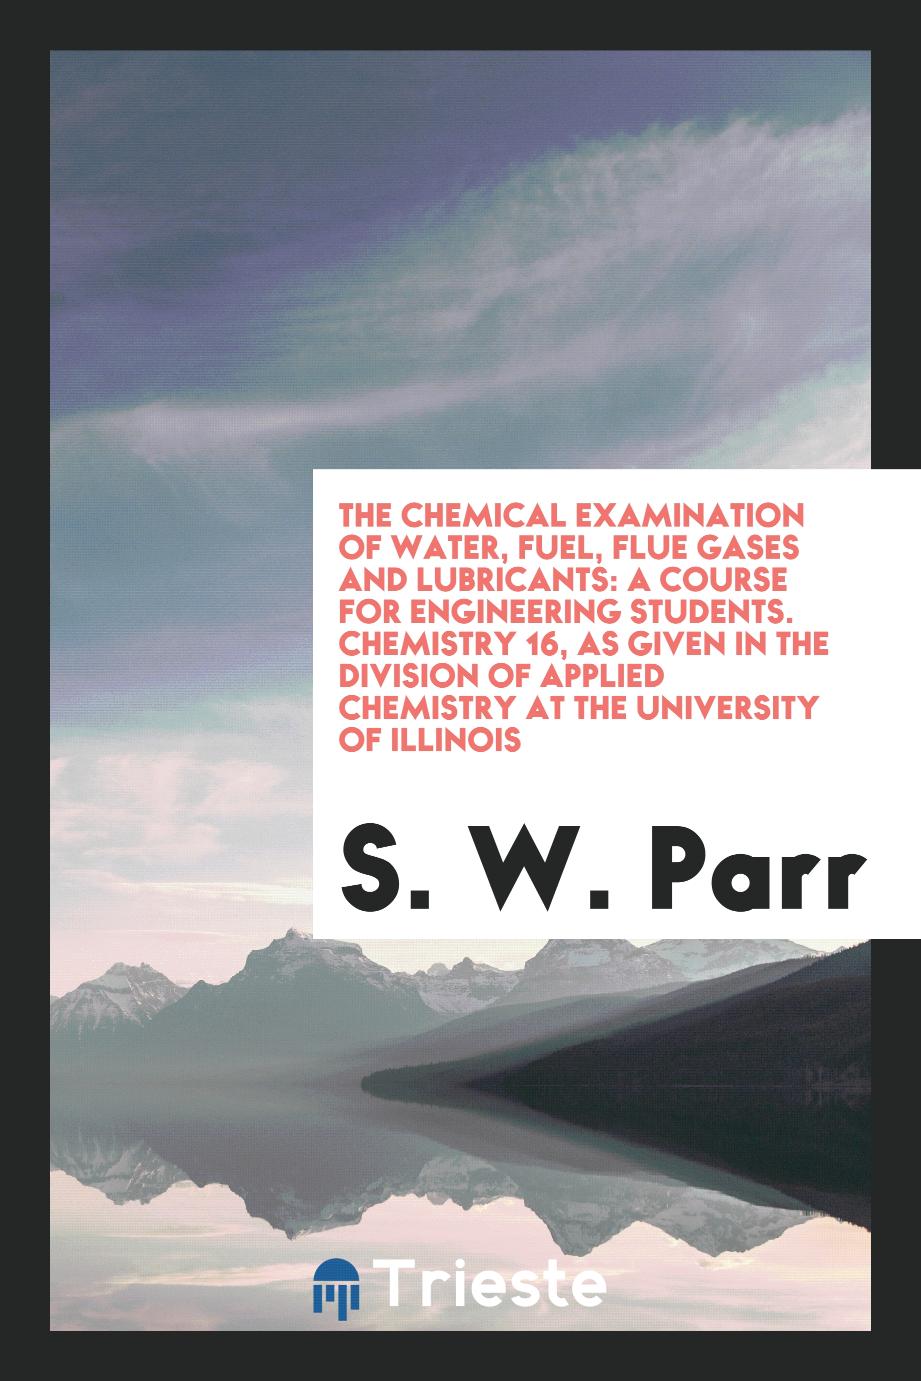 The Chemical Examination of Water, Fuel, Flue Gases and Lubricants: A Course for Engineering Students. Chemistry 16, as Given in the Division of Applied Chemistry at the University of Illinois